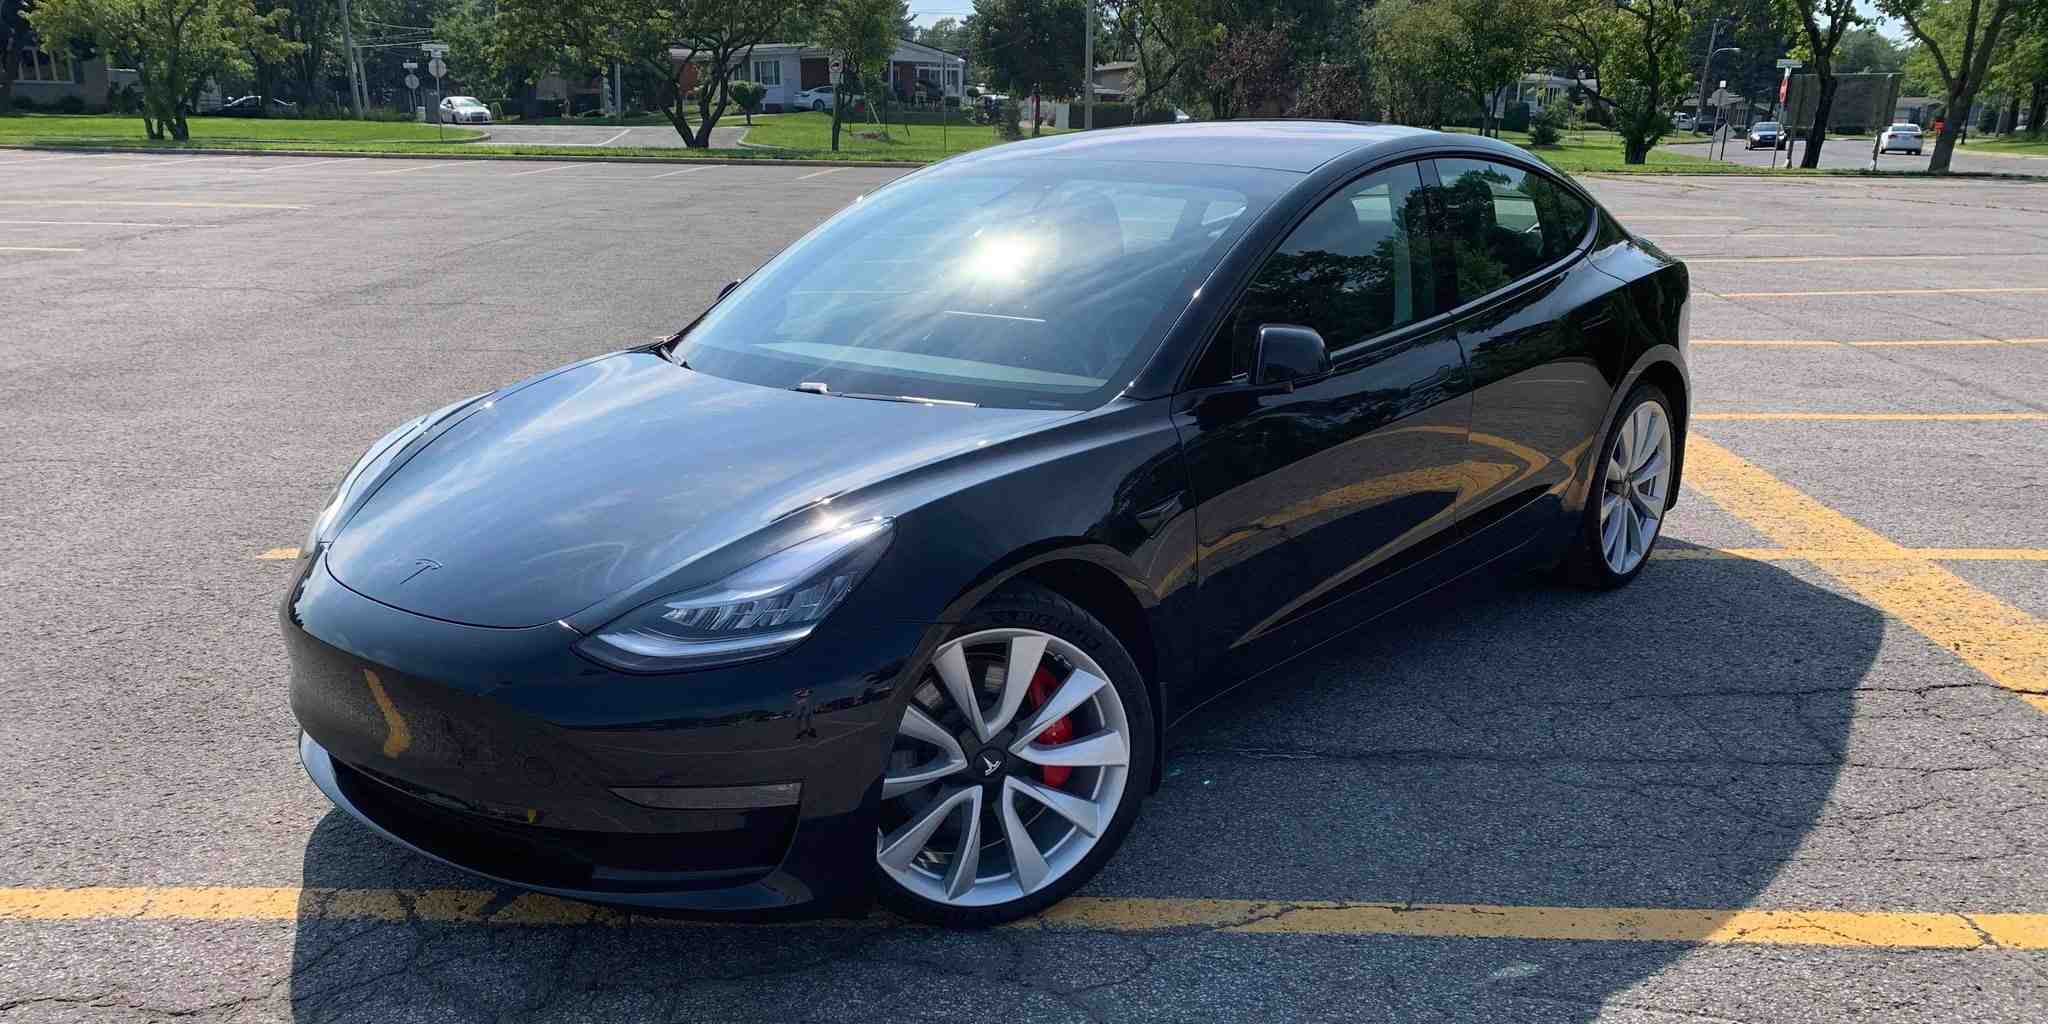 What is the highest mileage Tesla?